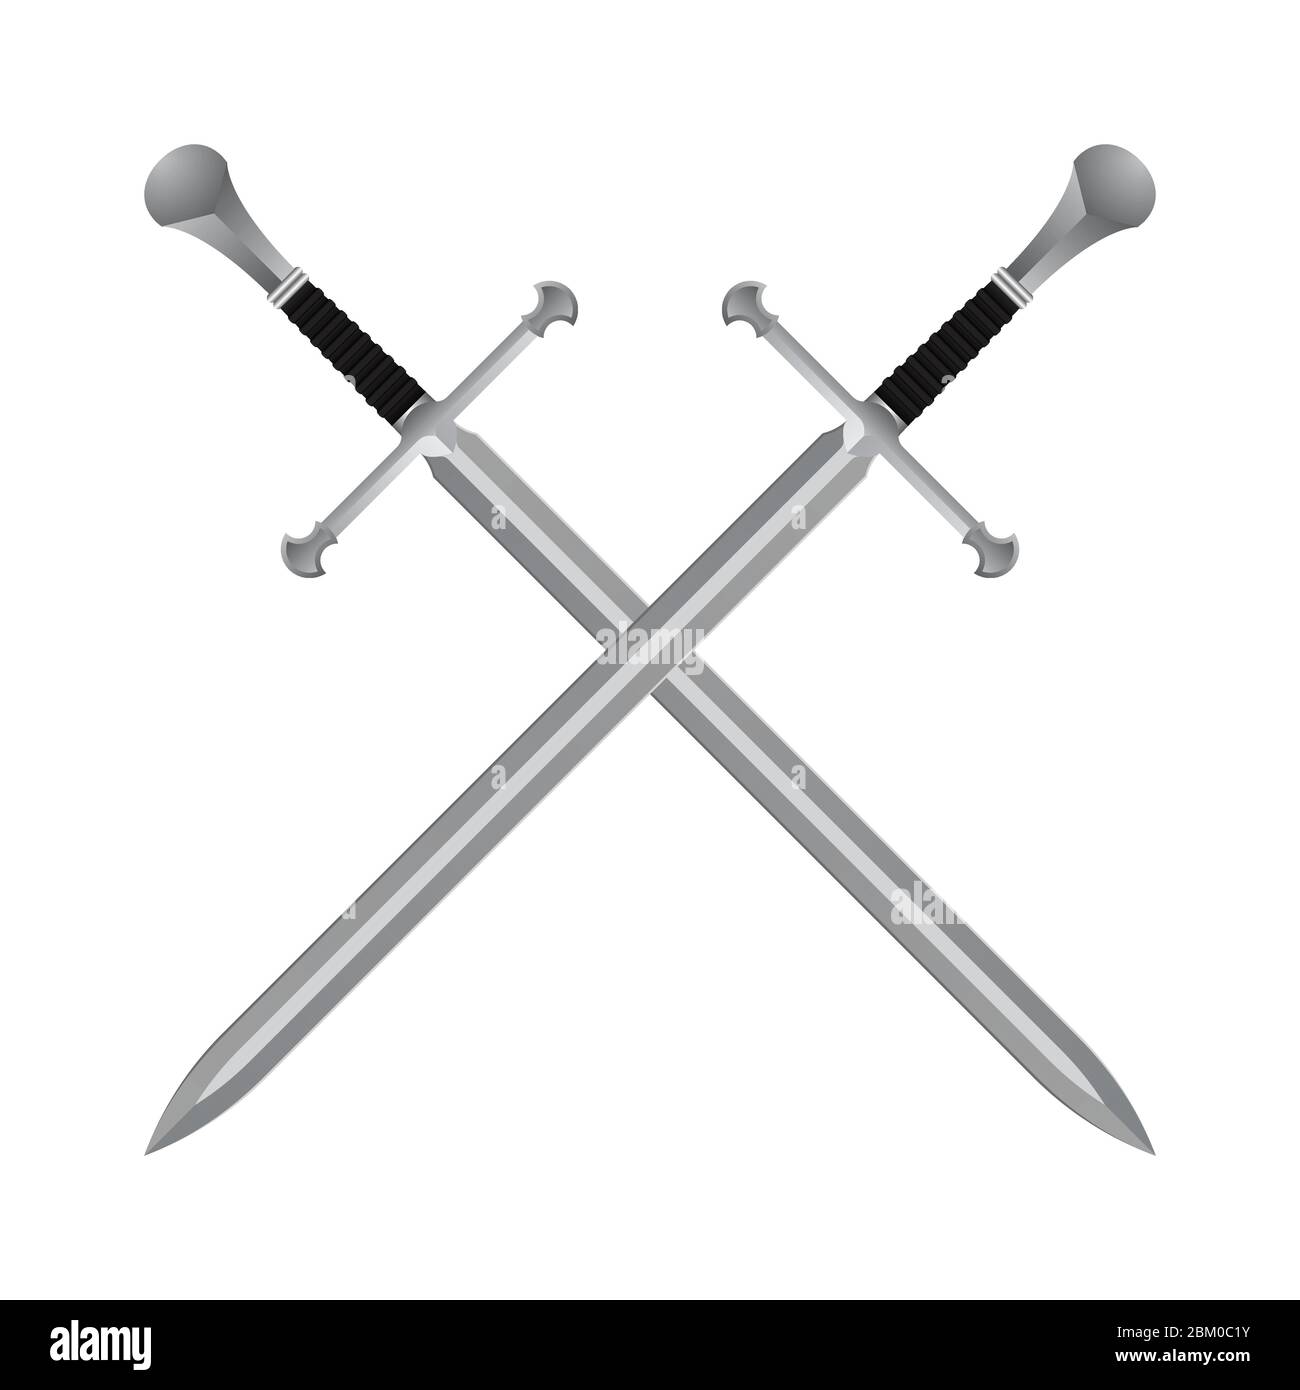 Knight templar symbol Cut Out Stock Images & Pictures - Alamy